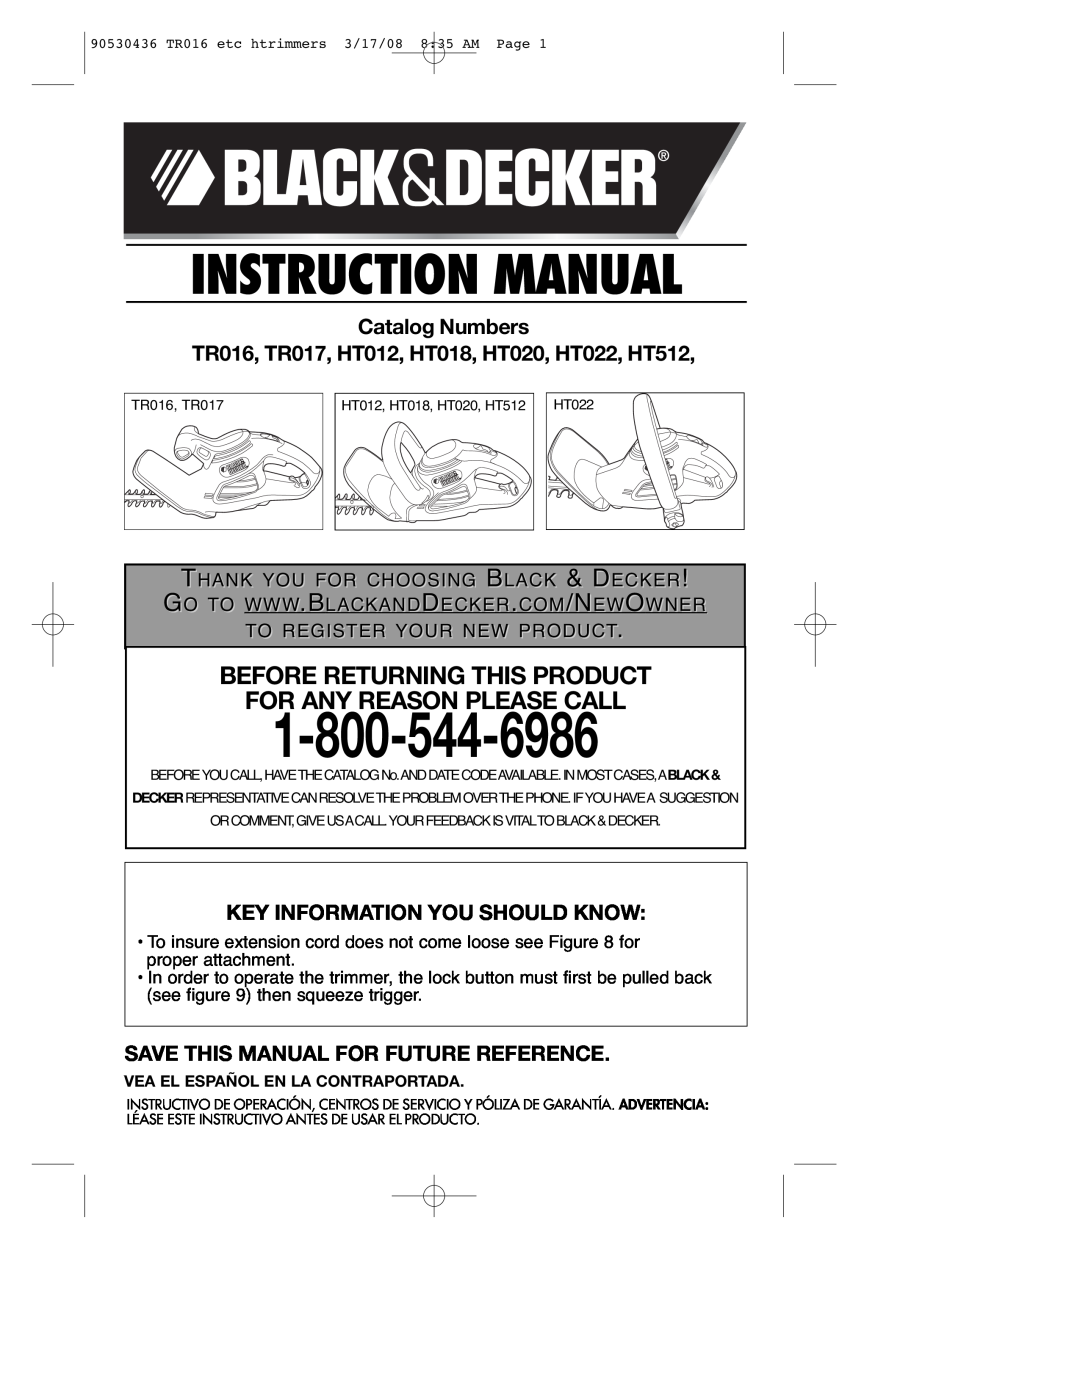 Black & Decker HT020, HT512, HT012, HT018, TR017 instruction manual Before Returning This Product For Any Reason Please Call 